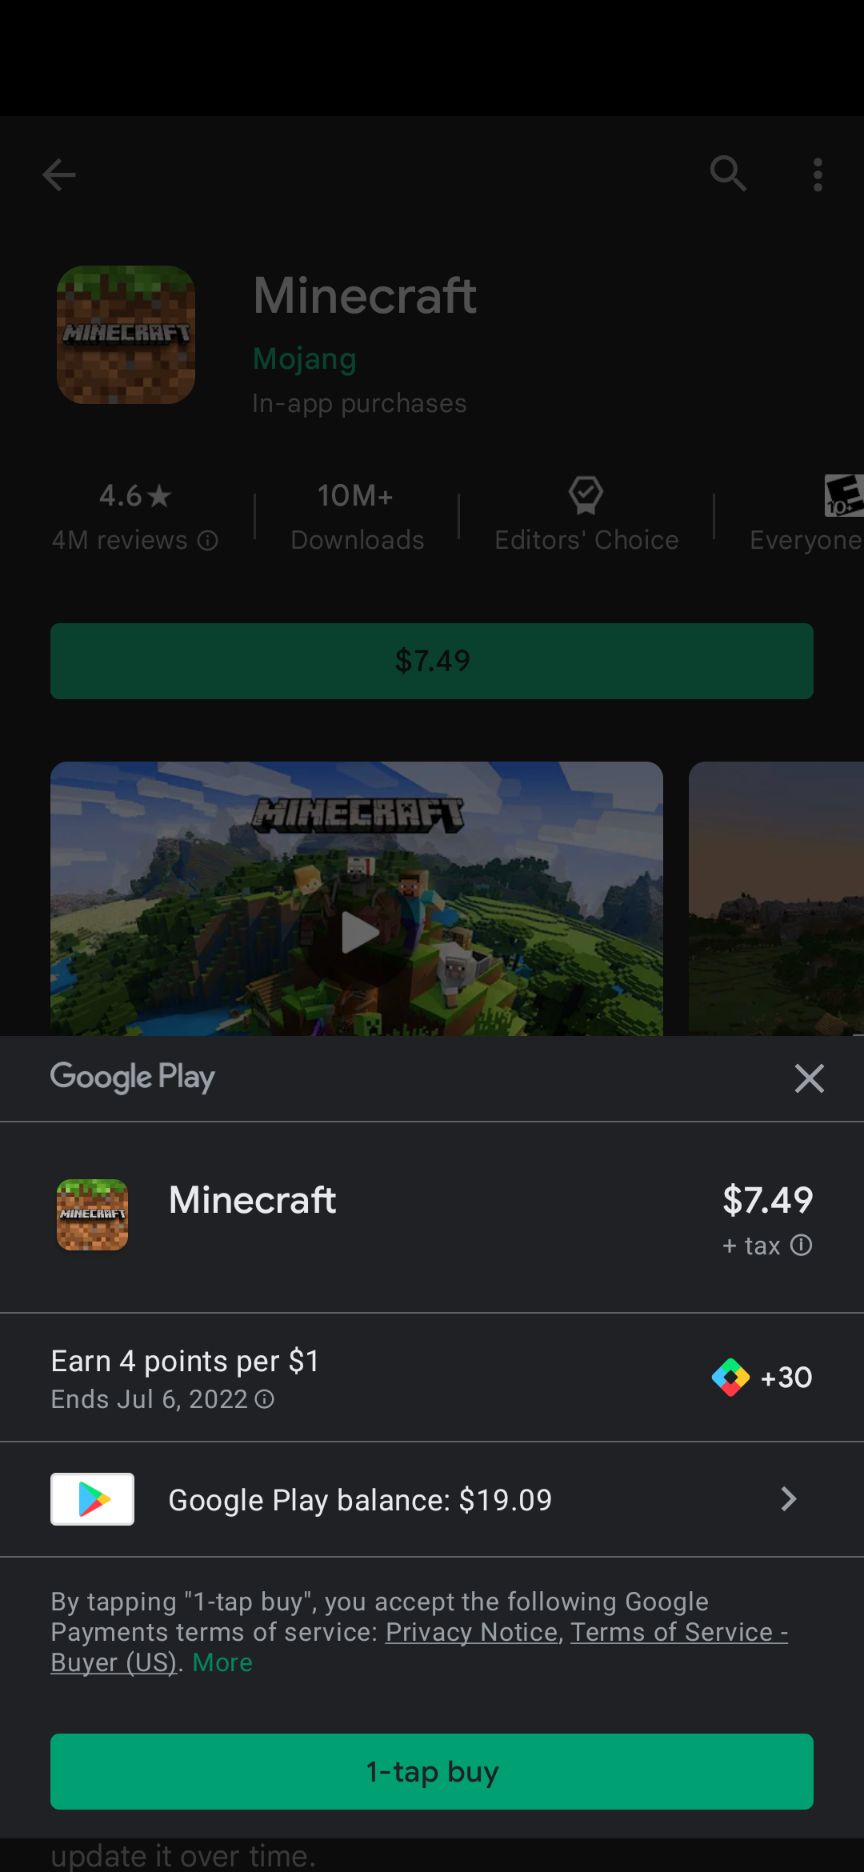 google play games free download